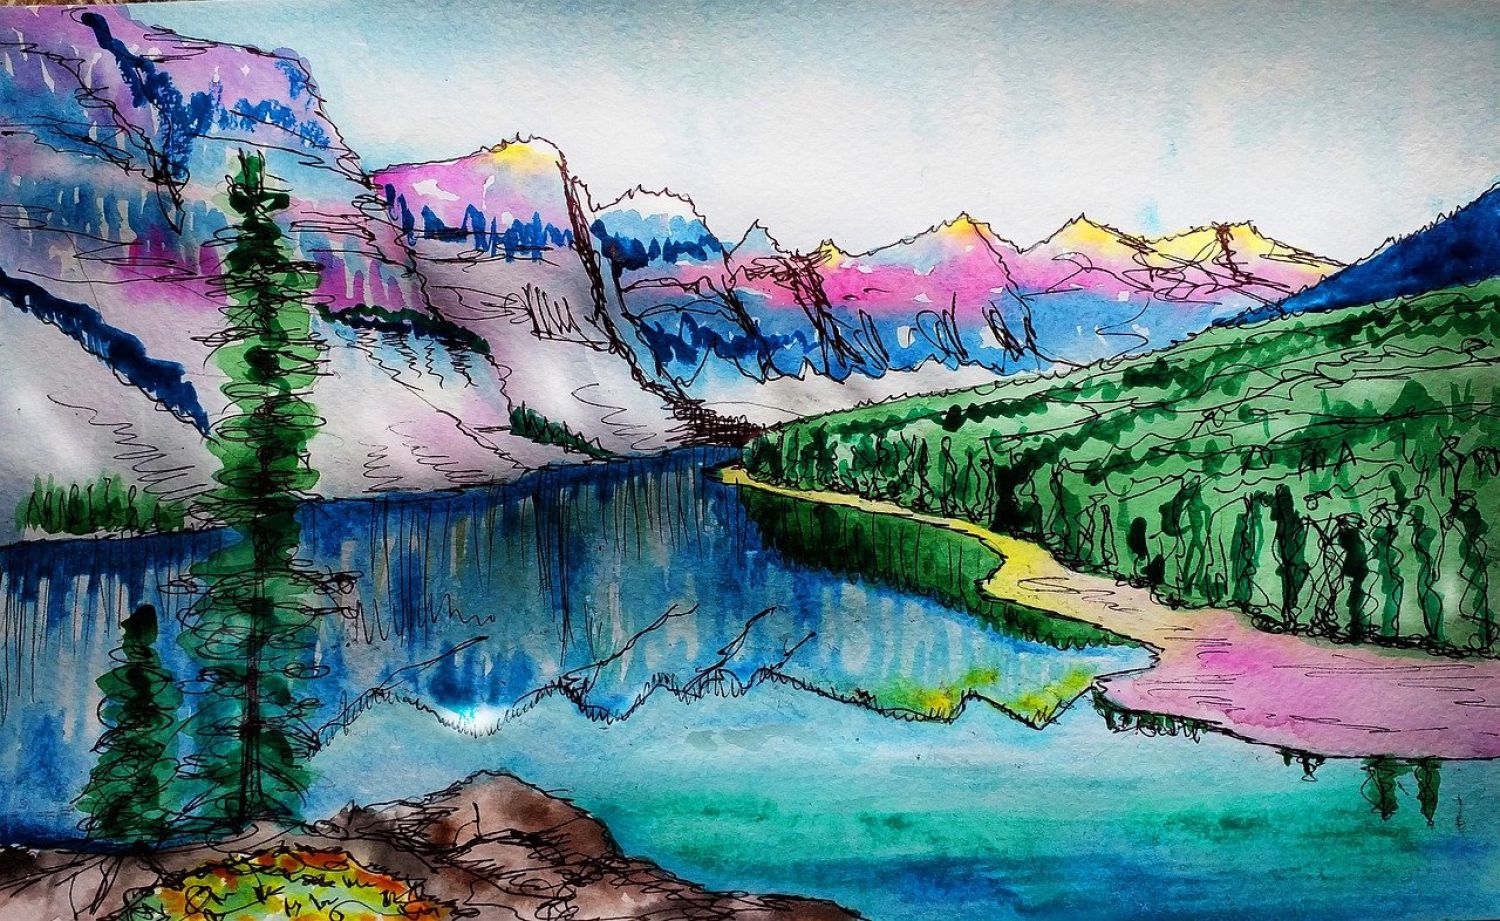 Sketch illustration of a river and mountain range